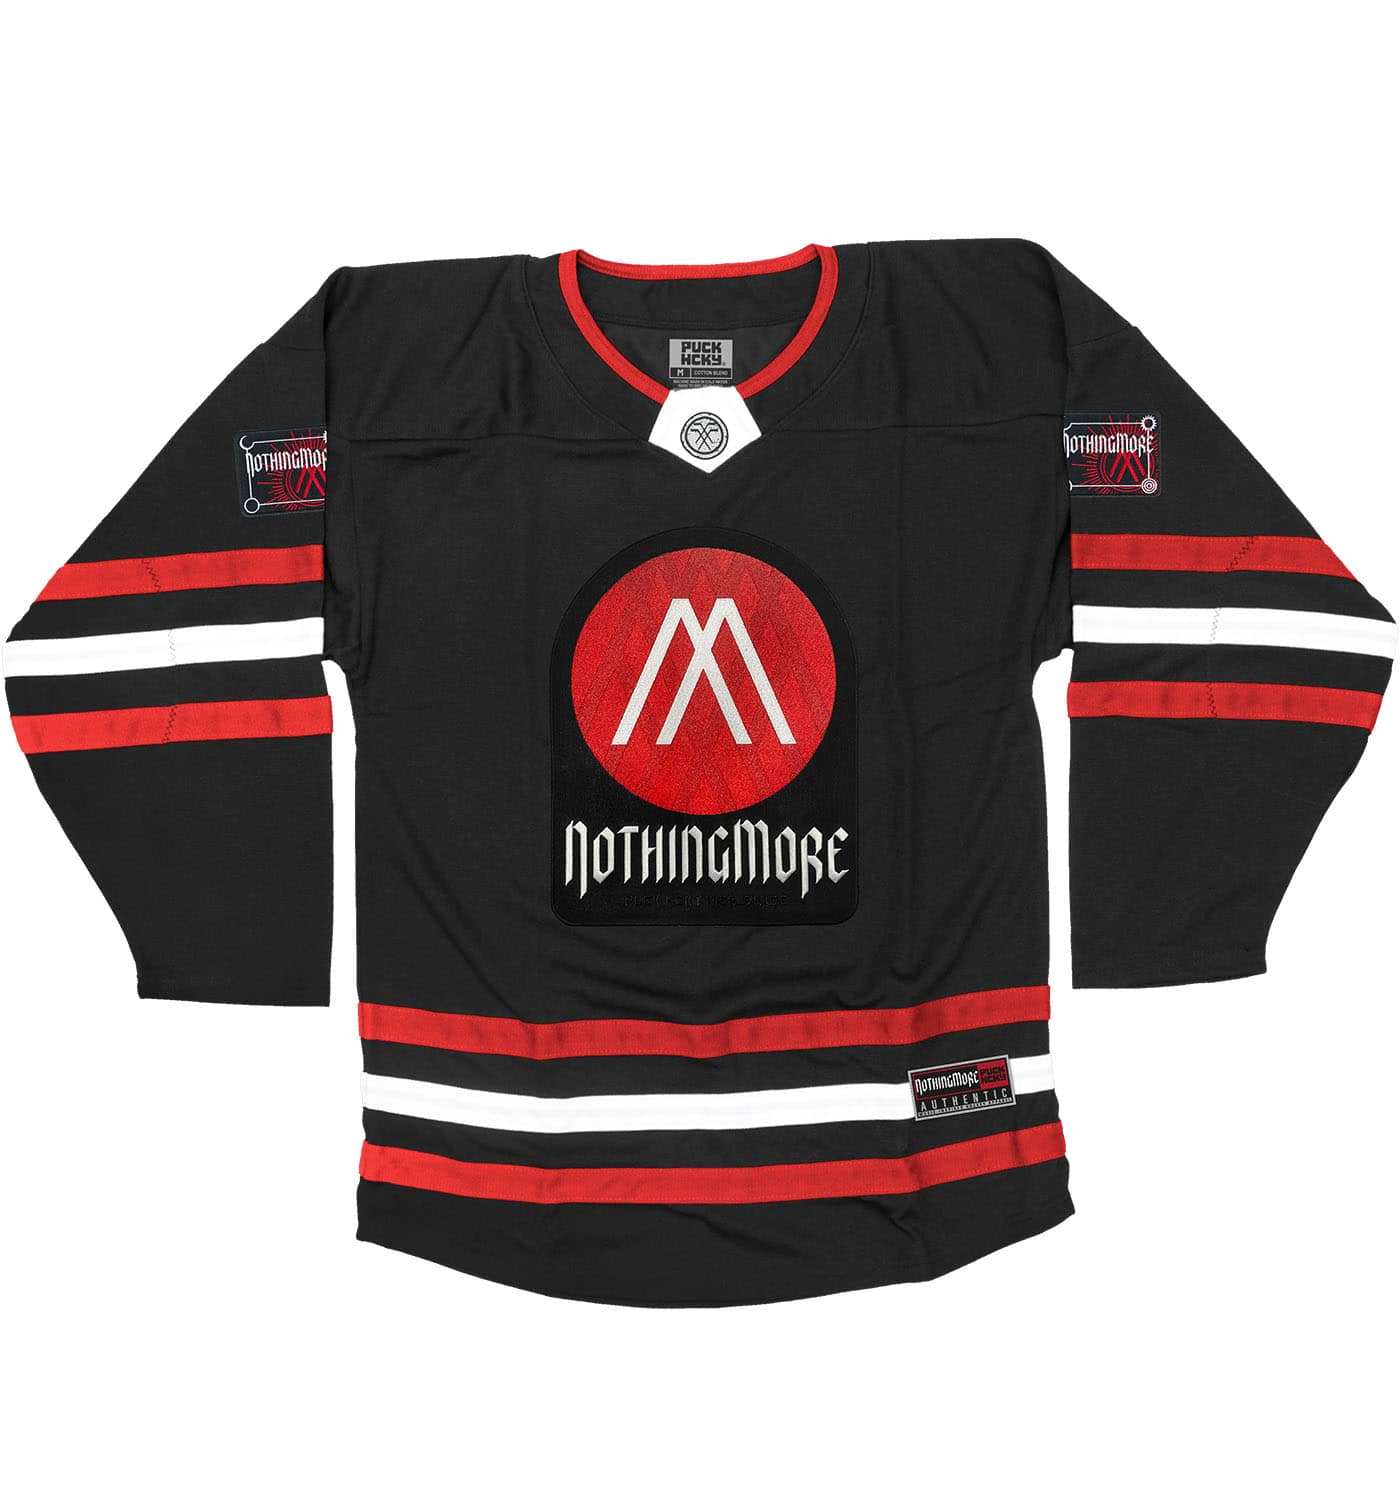 NOTHING MORE 'VALHALLA' deluxe hockey jersey in black, red, and white front view front view